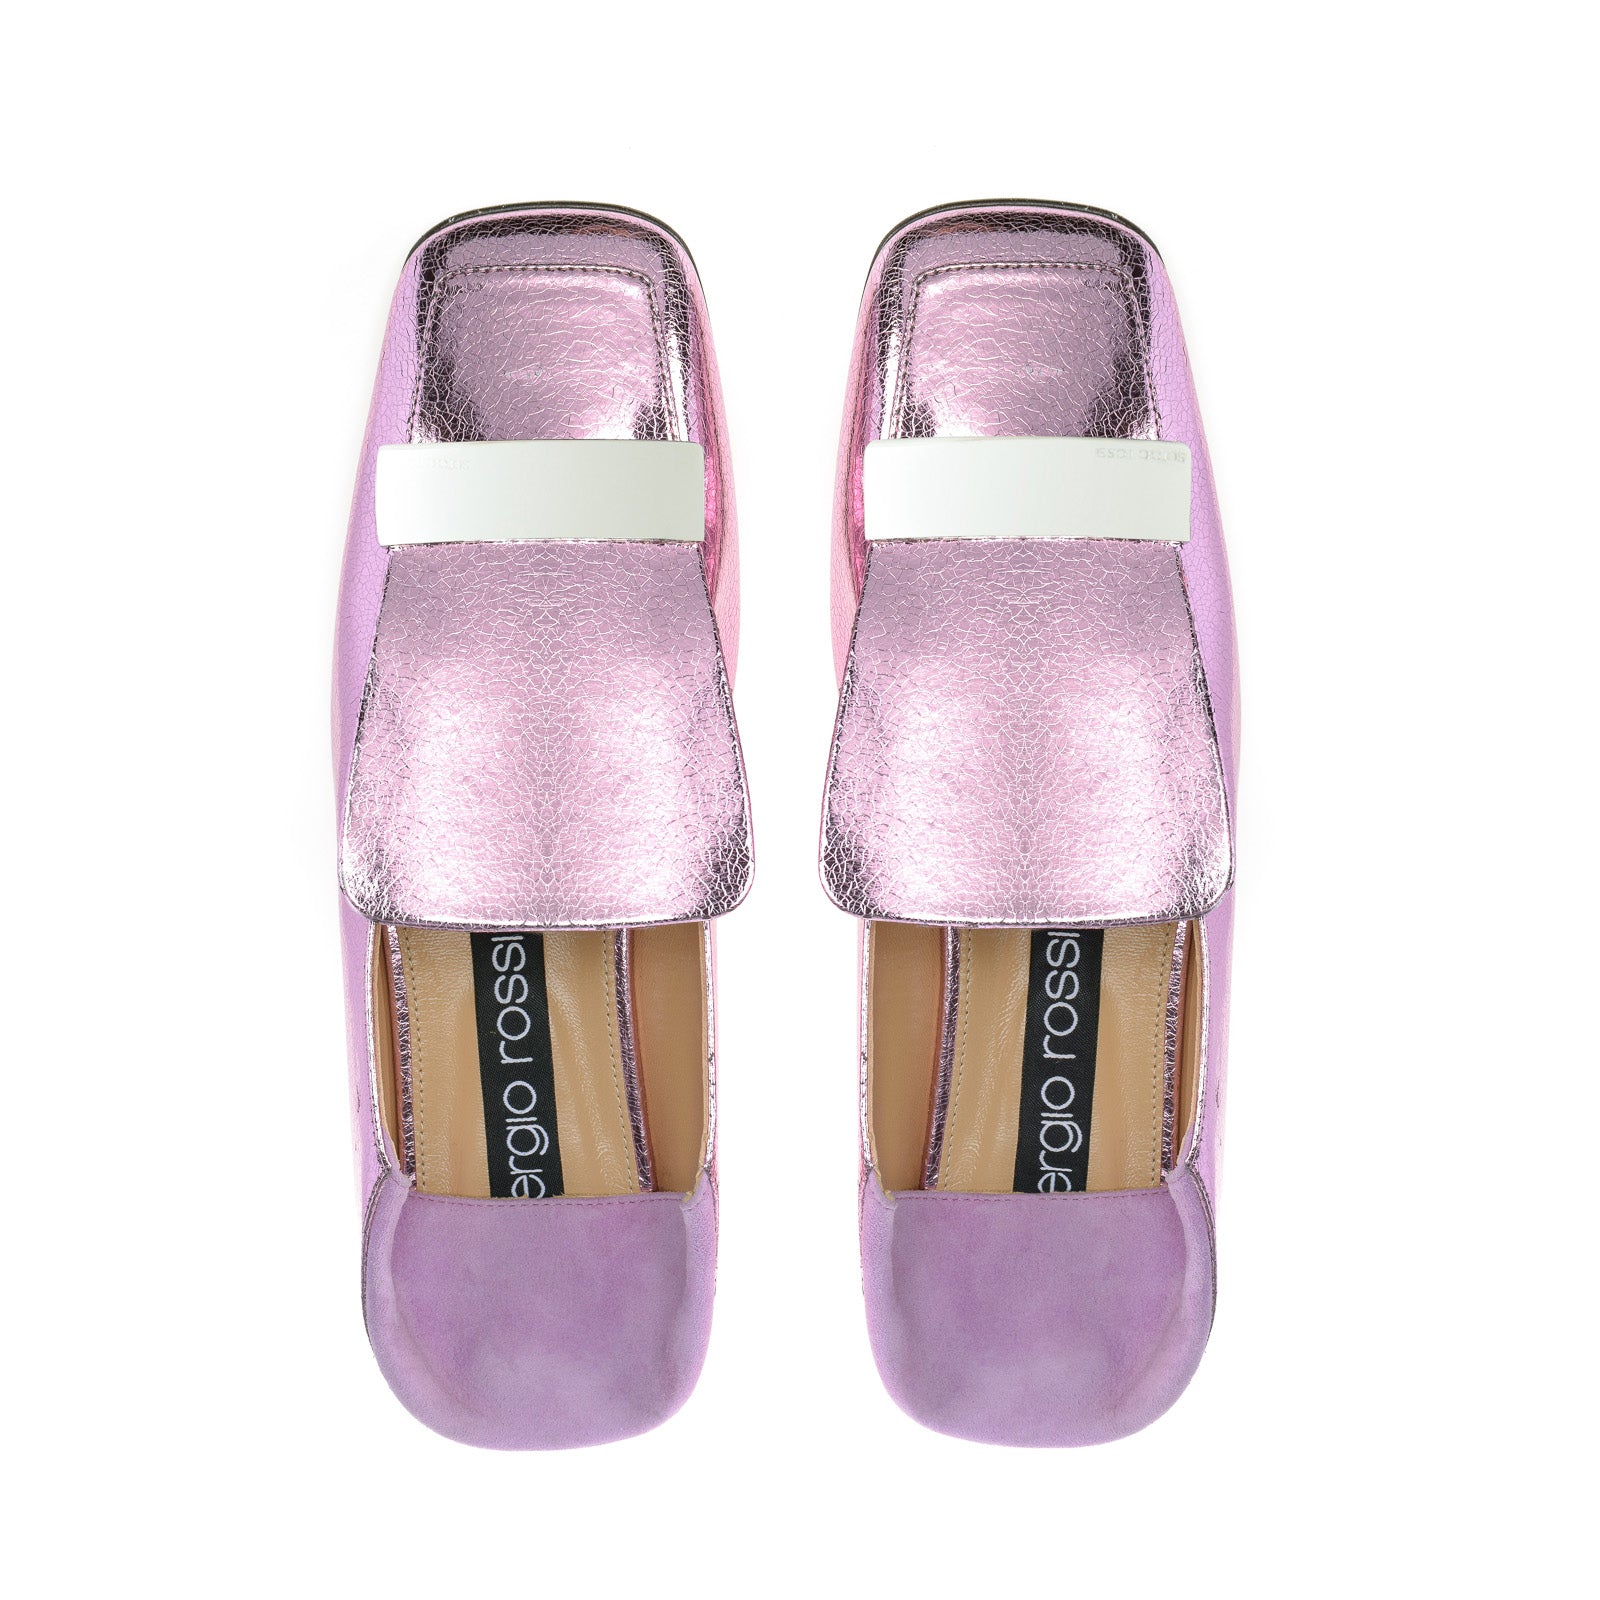 Sr1 loafers - Peonia Delicate